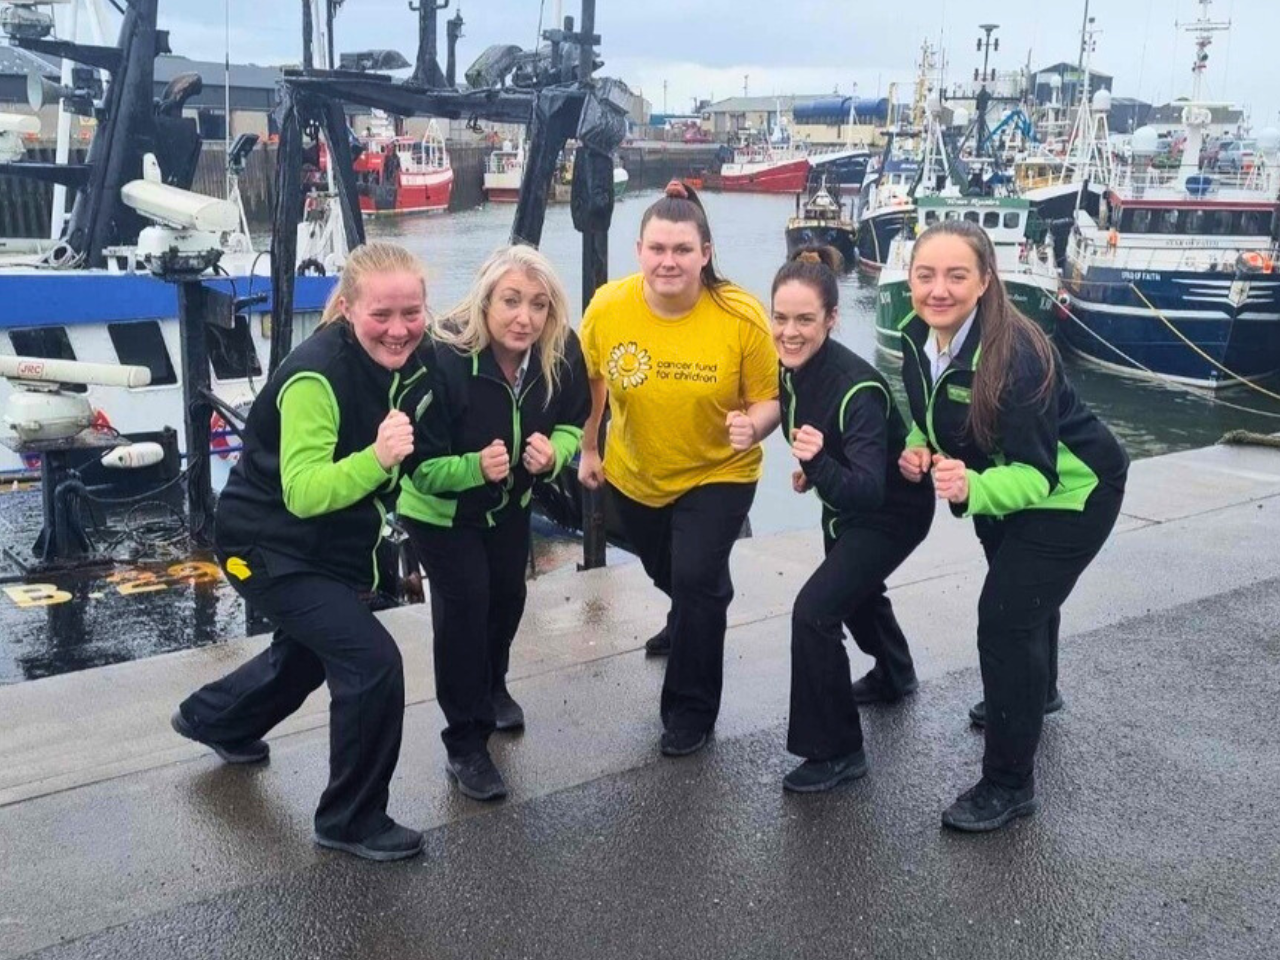 Asda Kilkeel colleagues go the extra mile(s) for charity